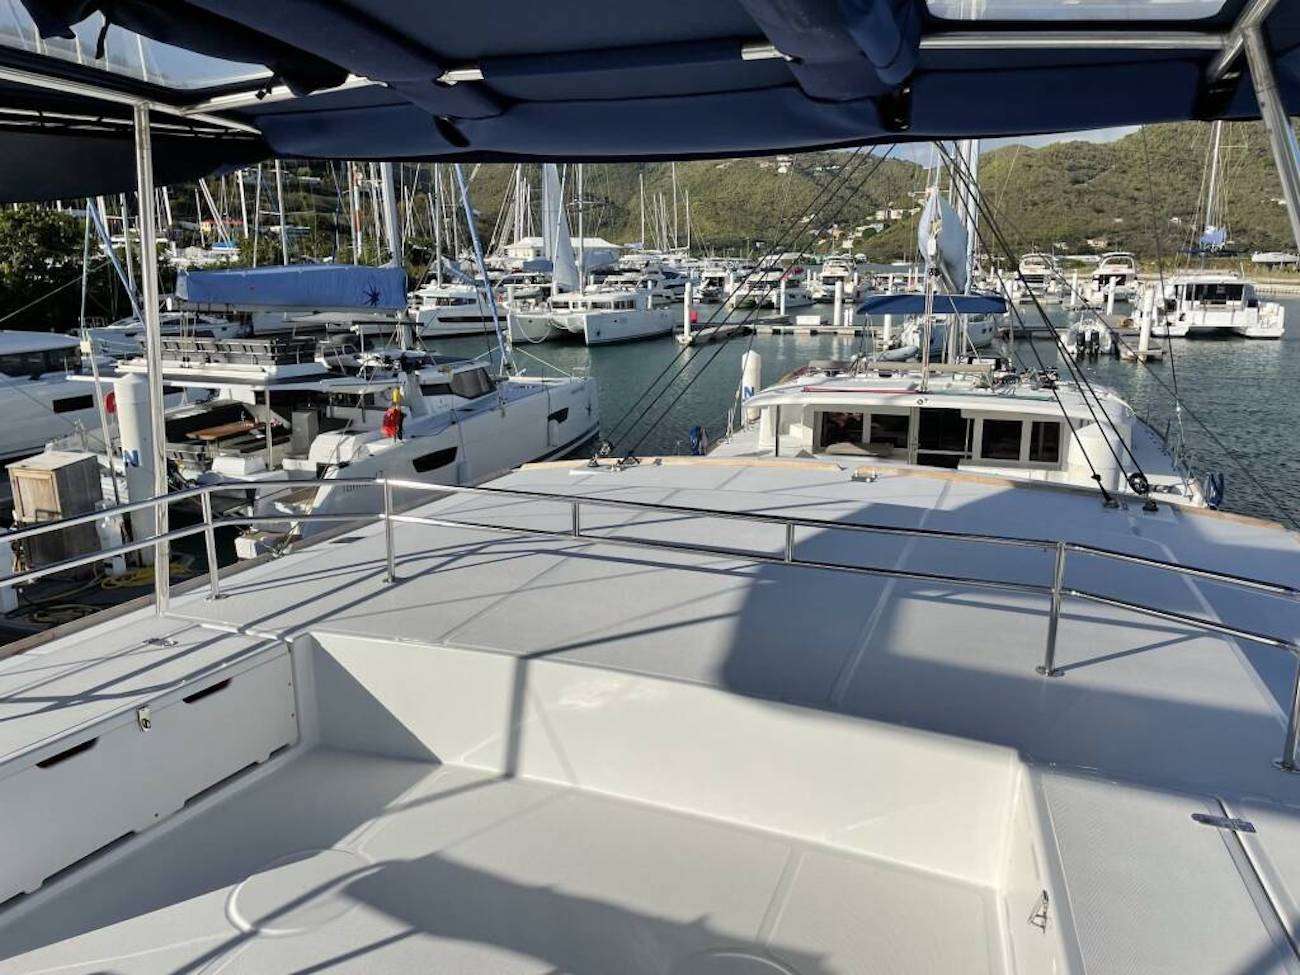 NO INHERITANCE - Yacht Charter East End Bay & Boat hire in Caribbean 4